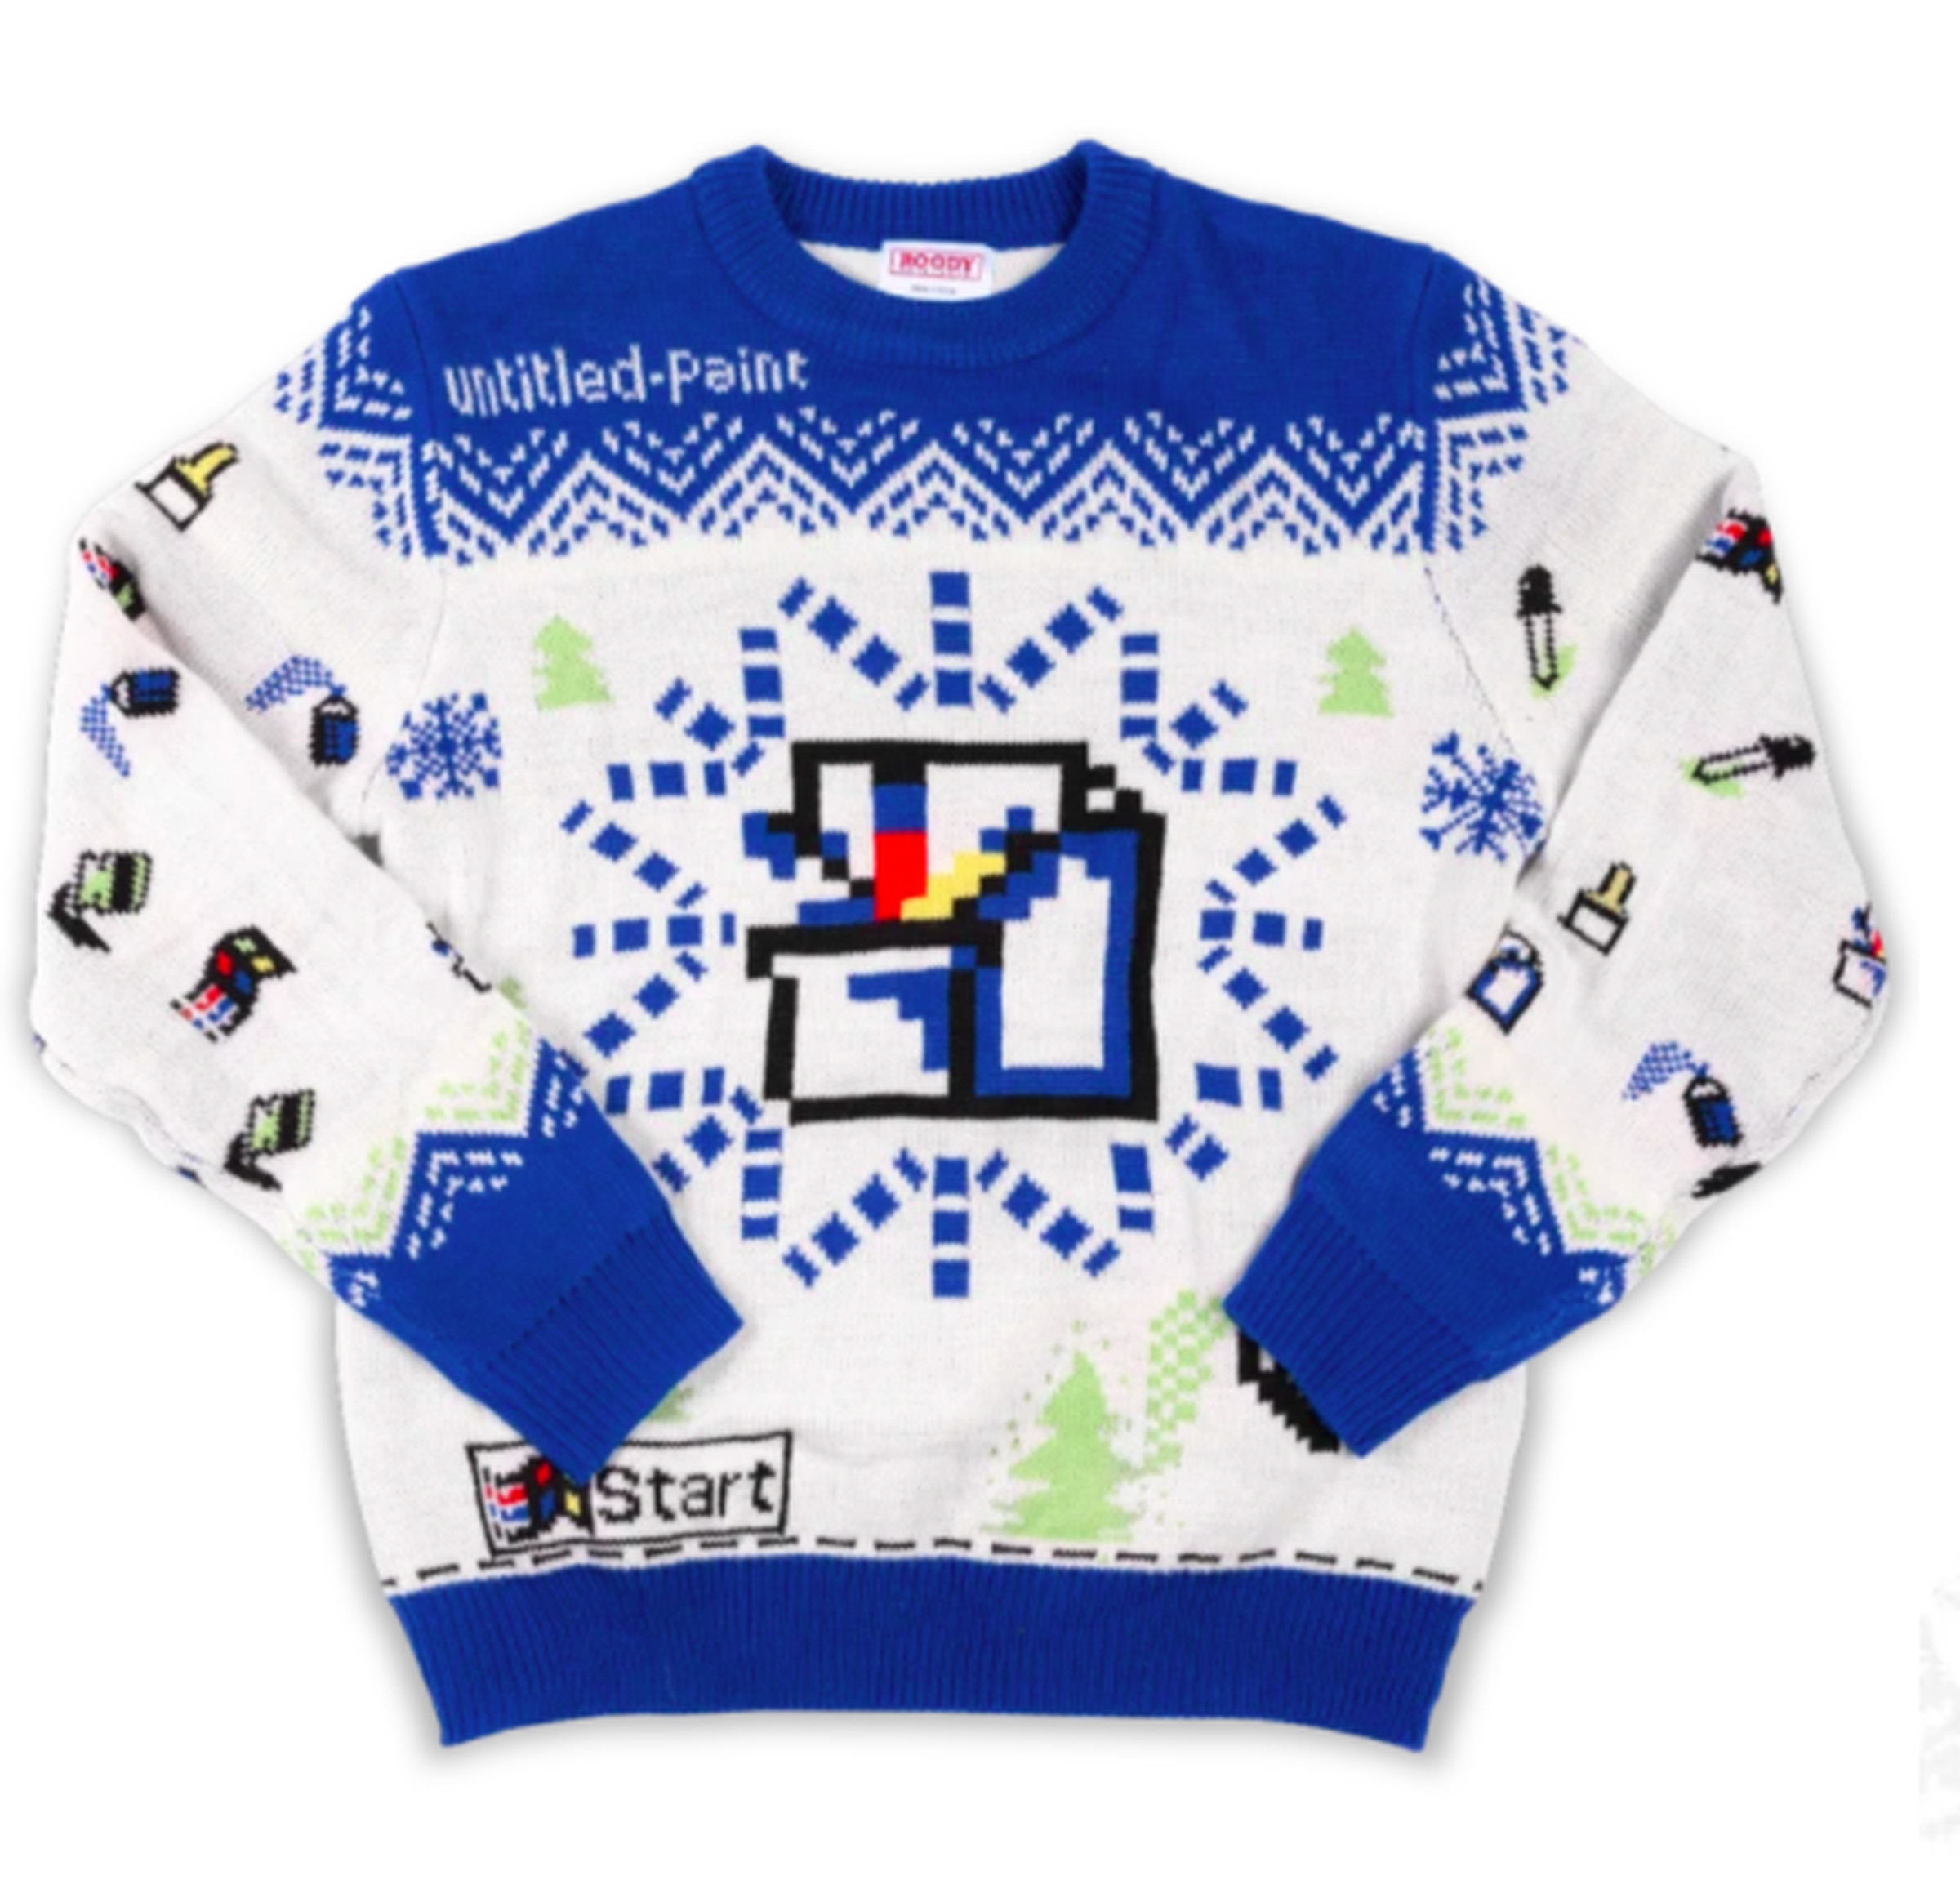 <em>The MS Paint Ugly Sweater features icons for all your favorite tools.</em>